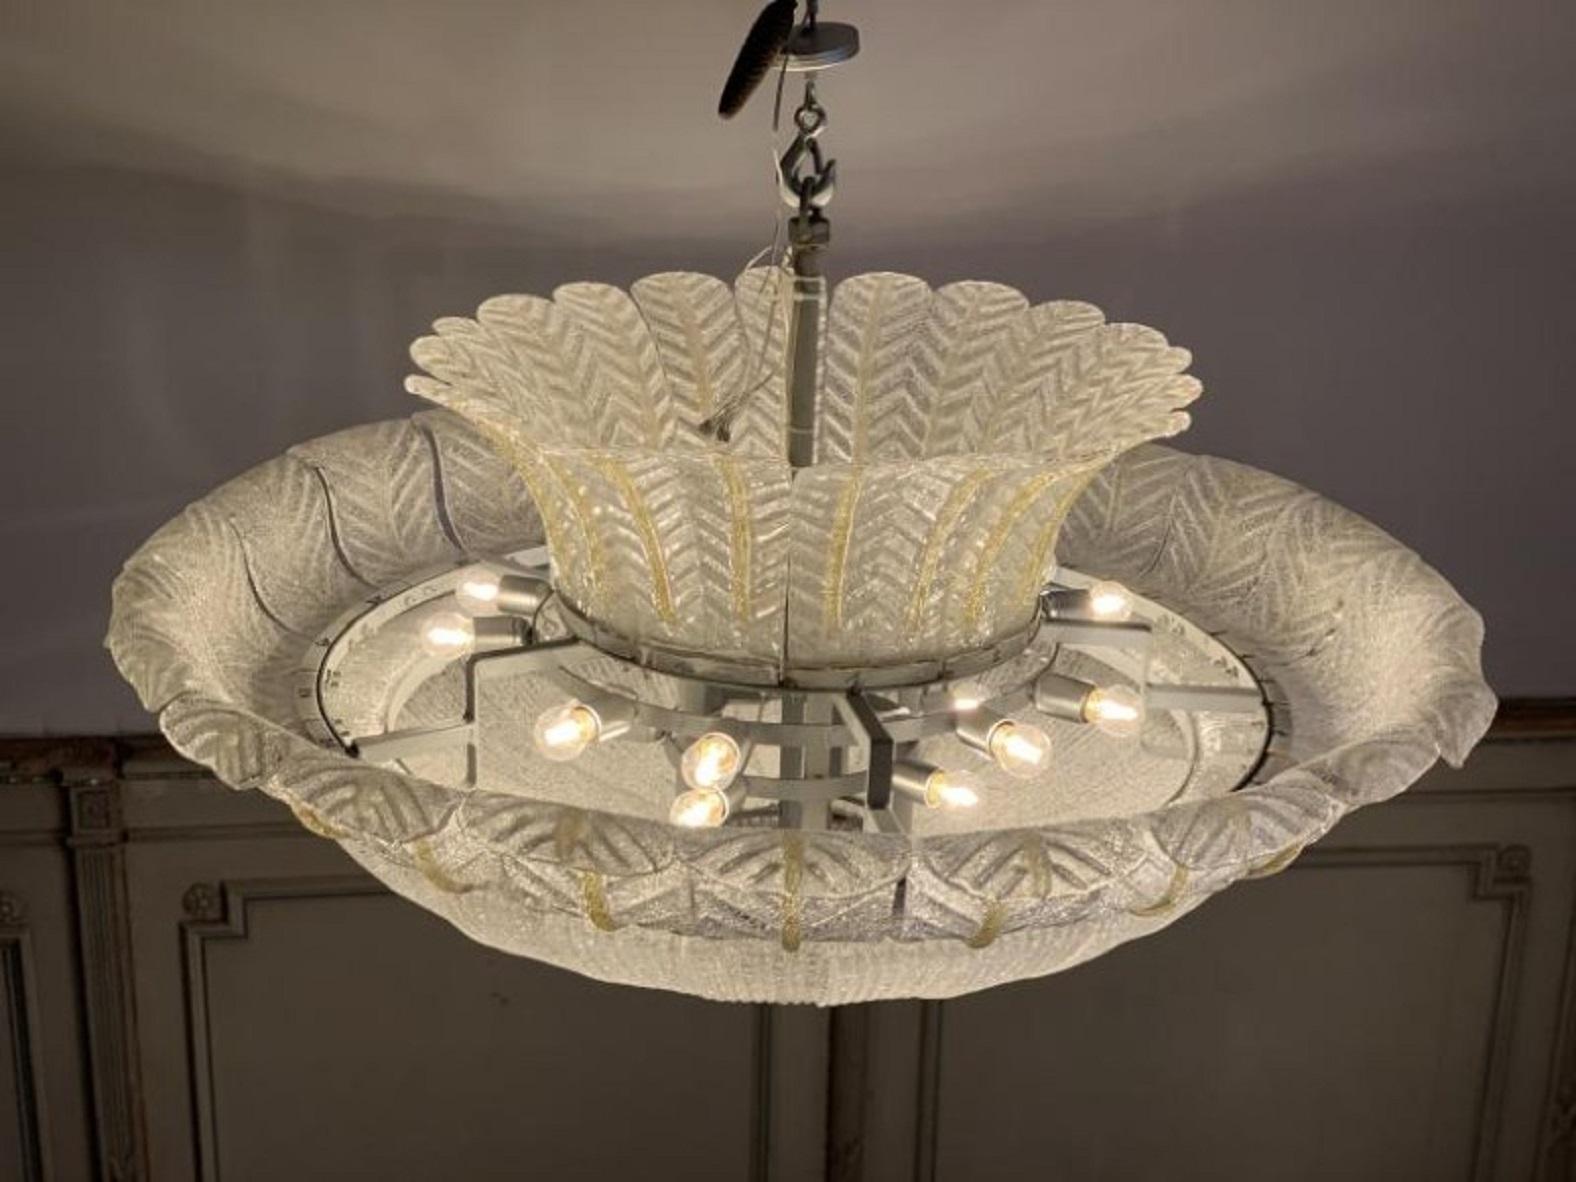 Murano glass ceiling chandelier by Barovier - Italy 1940s.